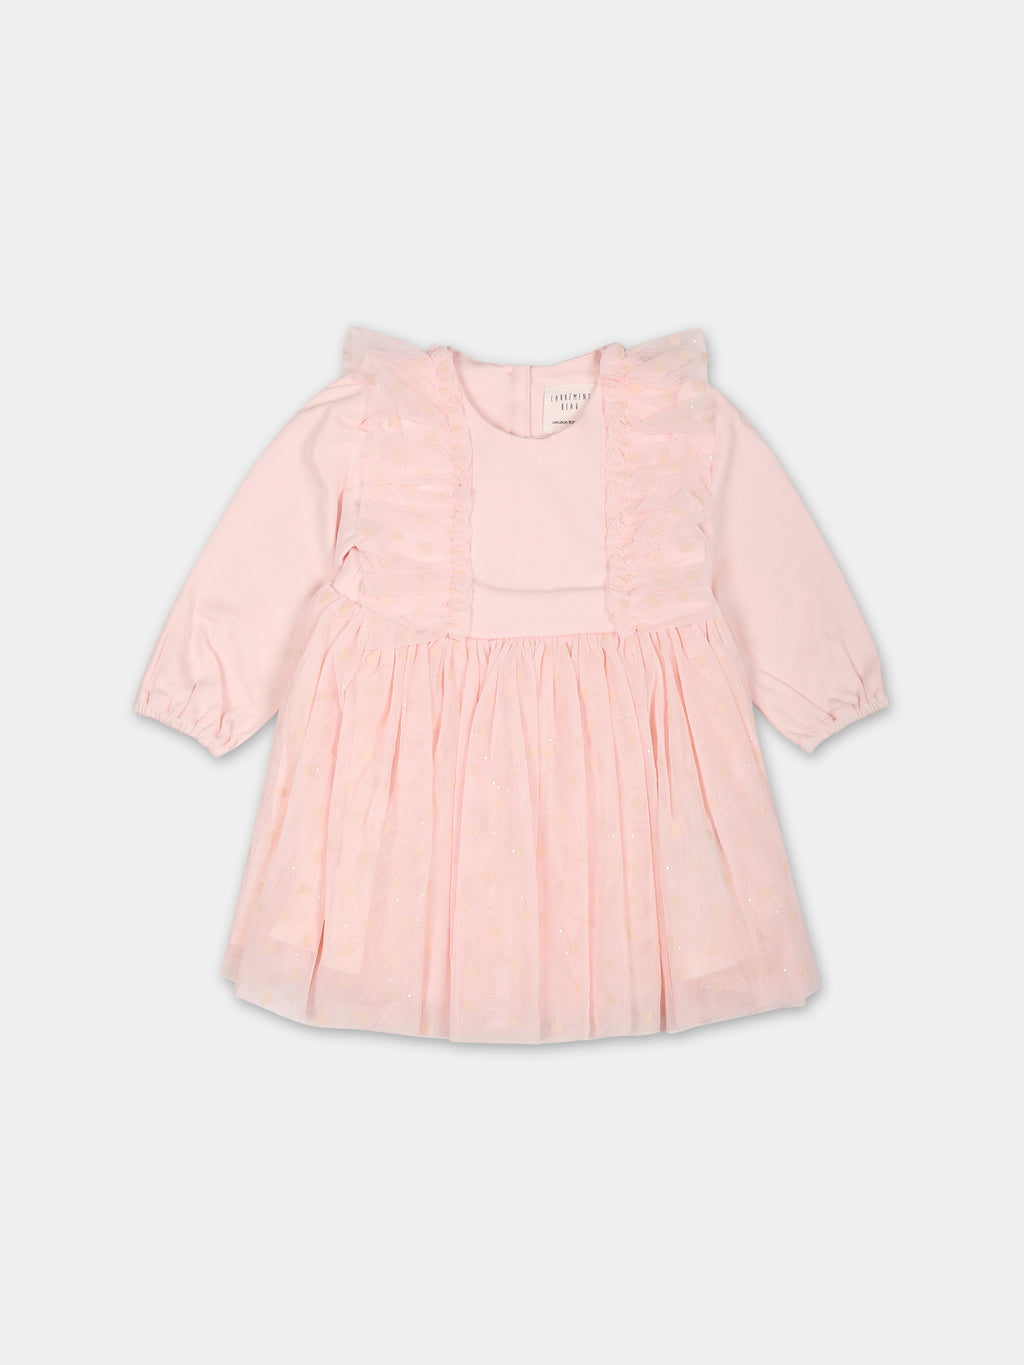 Pink dress with hear for baby girl